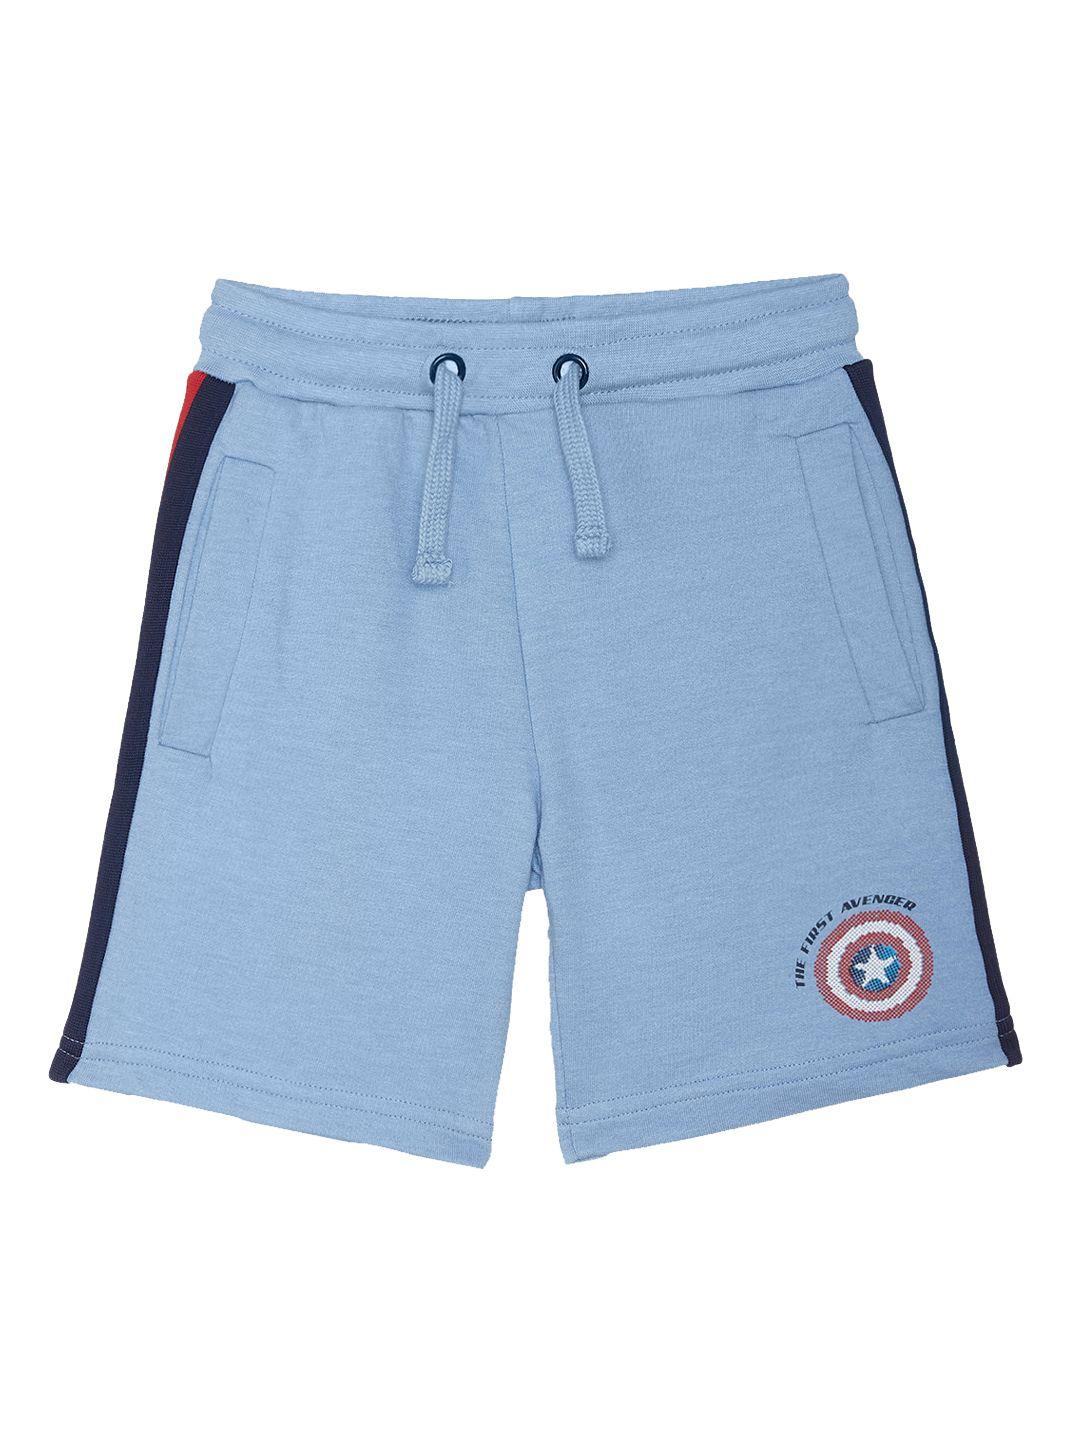 kids ville boys blue regular fit solid shorts with captain america print detail